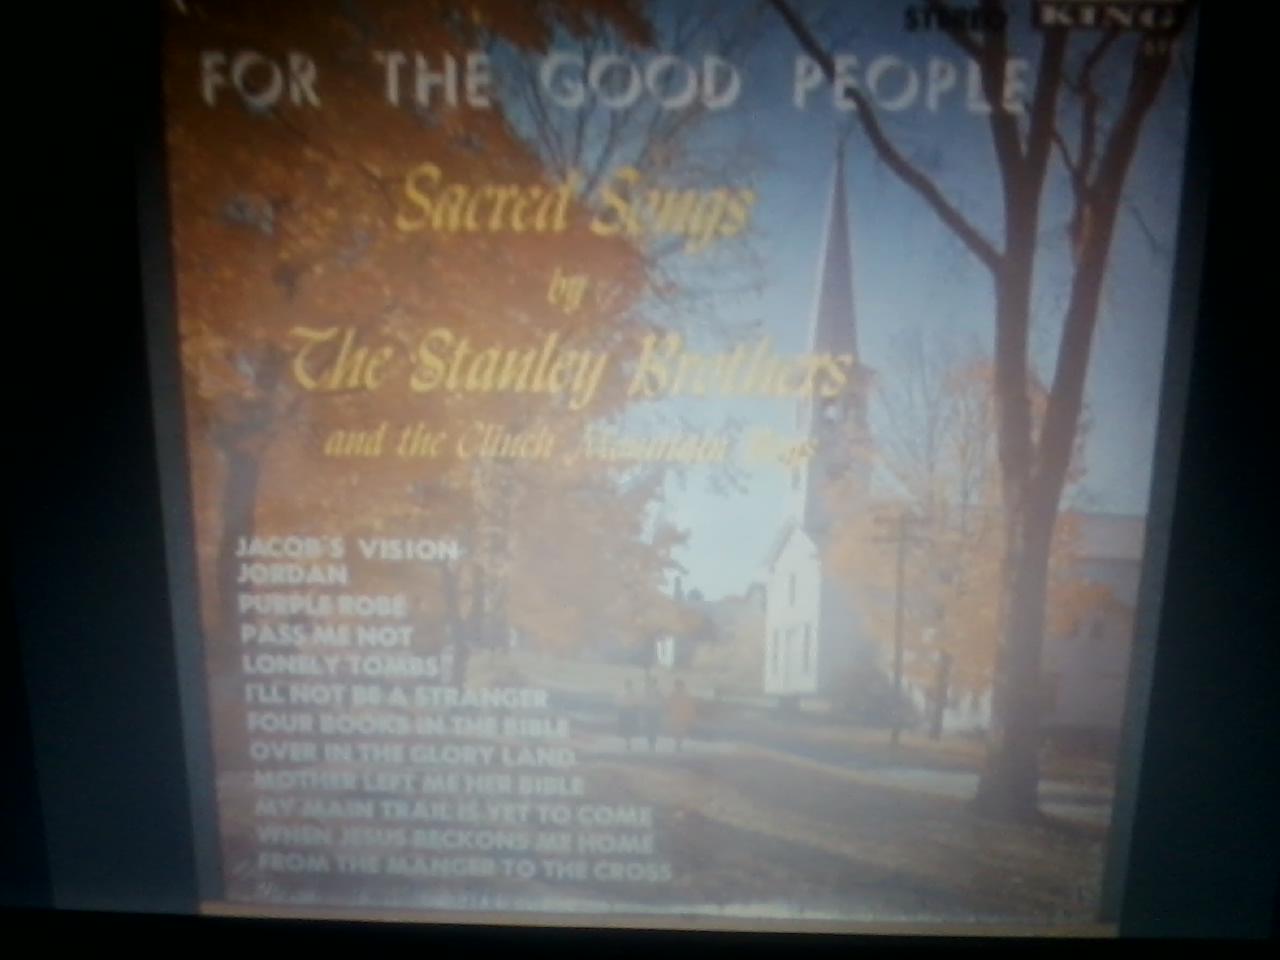 i love the stanley brothers music